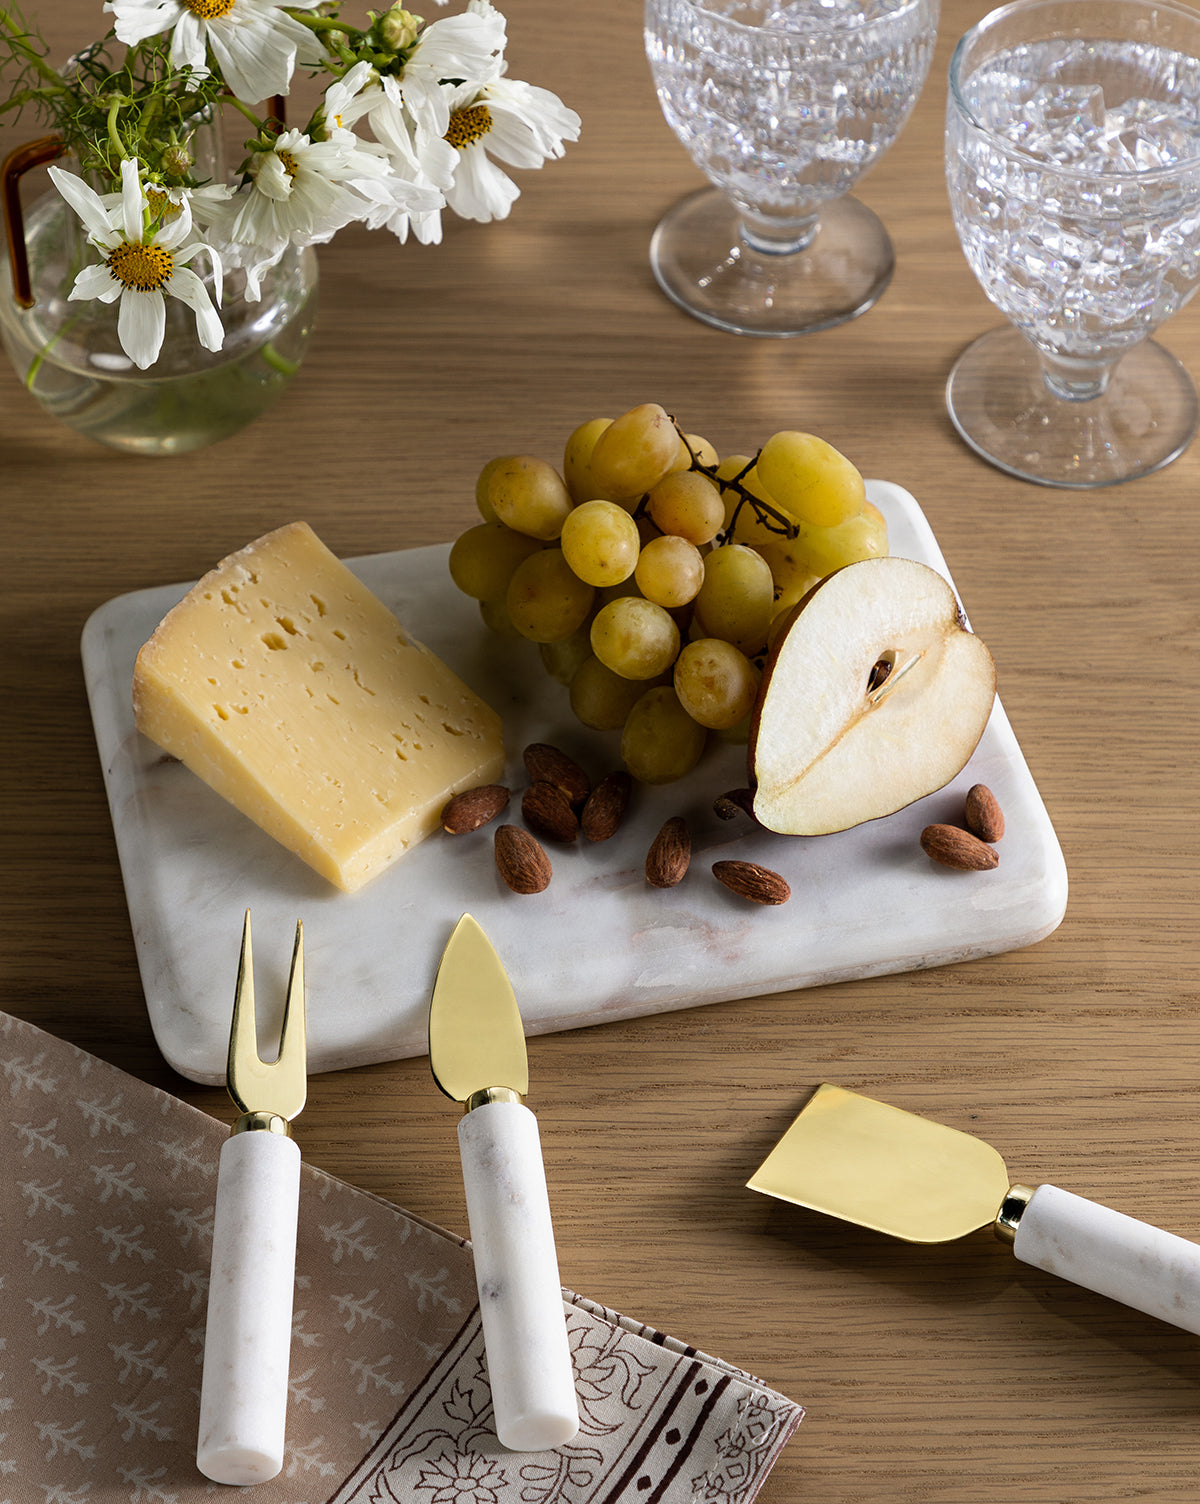 Creative Co-Op, Marble Rounded Edge Cheese Board